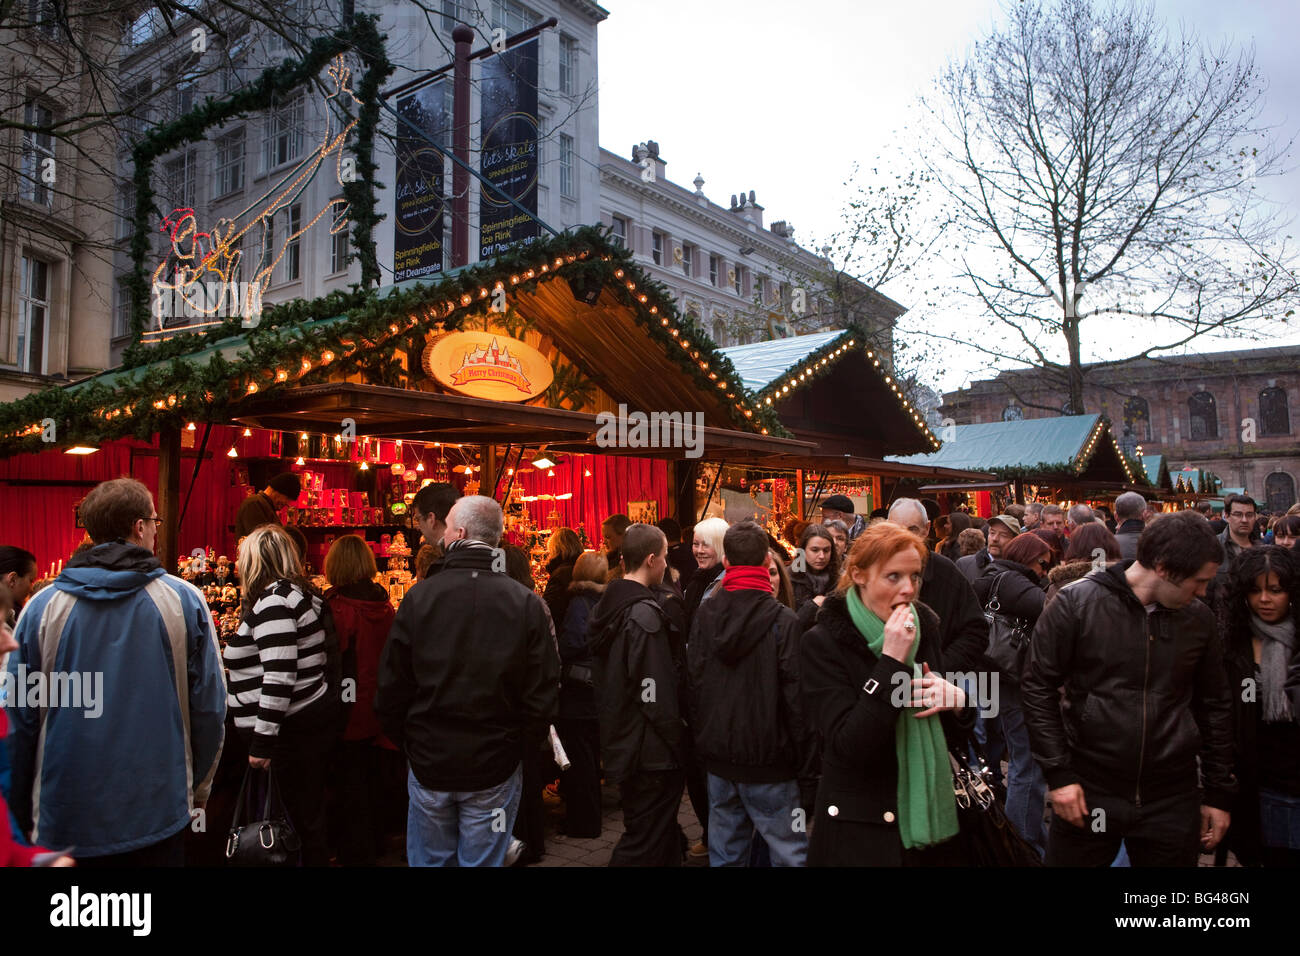 UK, England, Manchester, St Annes Square Christmas Market Stock Photo